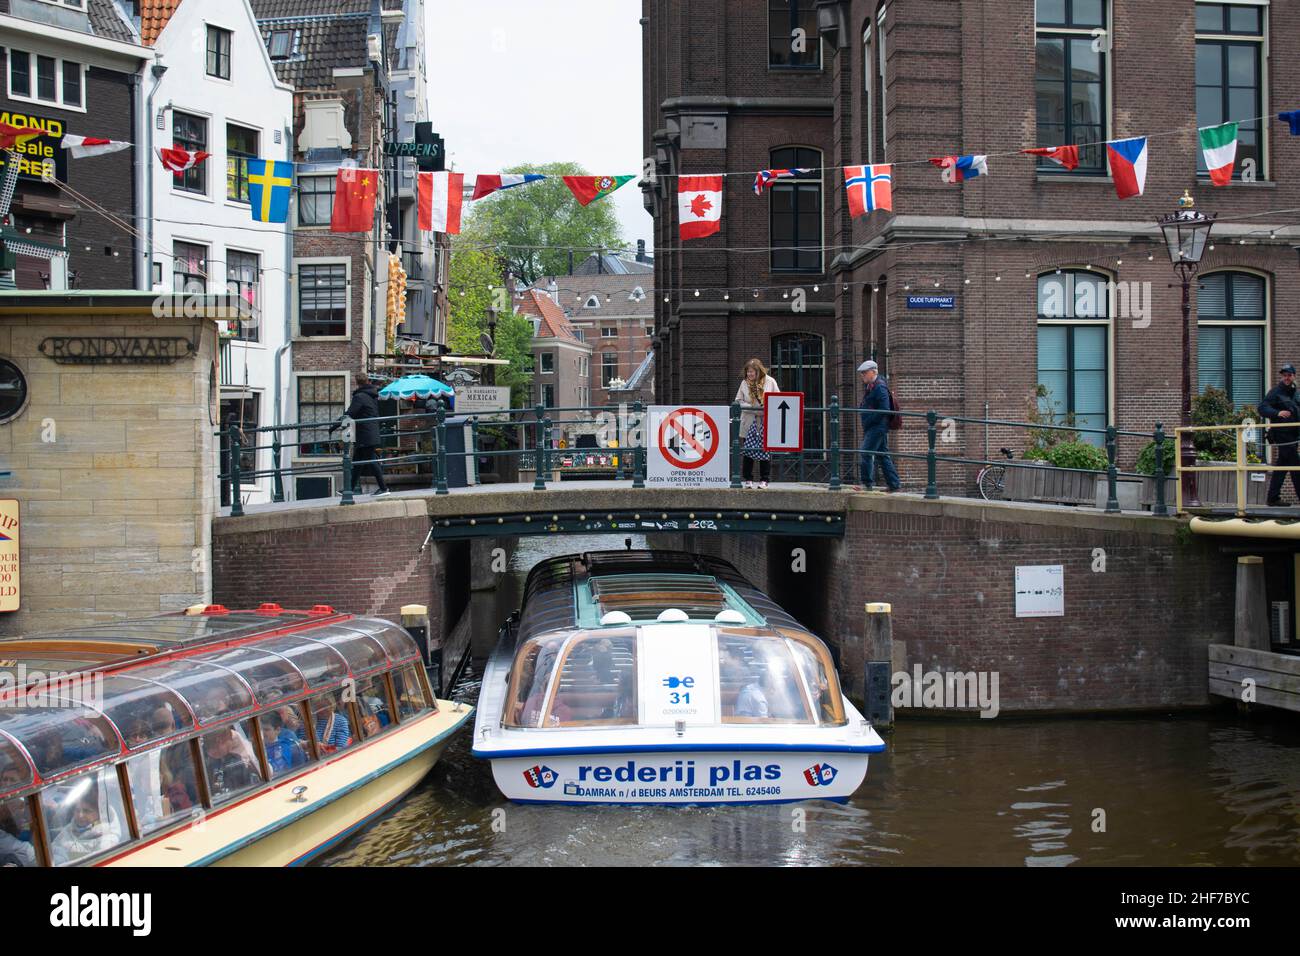 Amsterdam, Holland, The Netherlands - 6th May 2019: Numerous different nationality flags flying in the wind on the canal in Amsterdam on a summers day Stock Photo